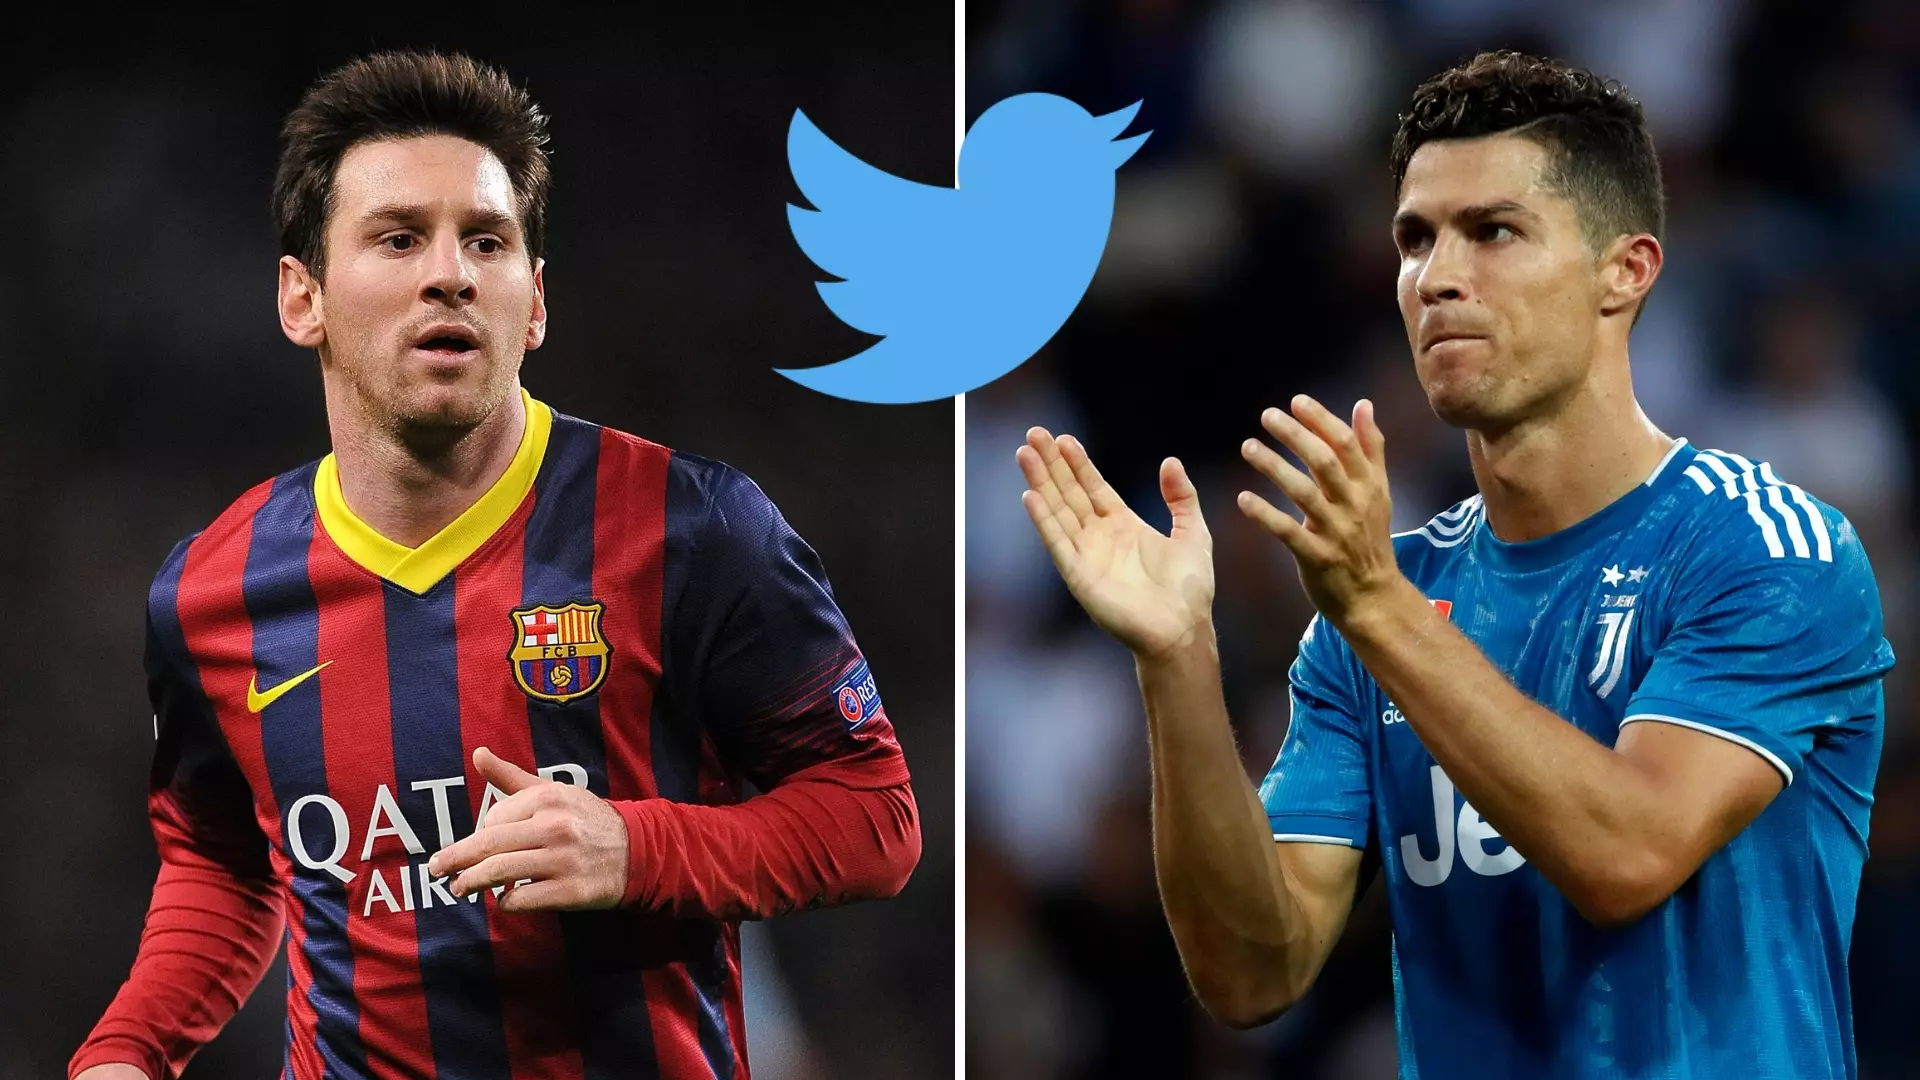 Lionel Messi Crowned The GOAT By Official Twitter Sports After Cristiano Ronaldo Snub